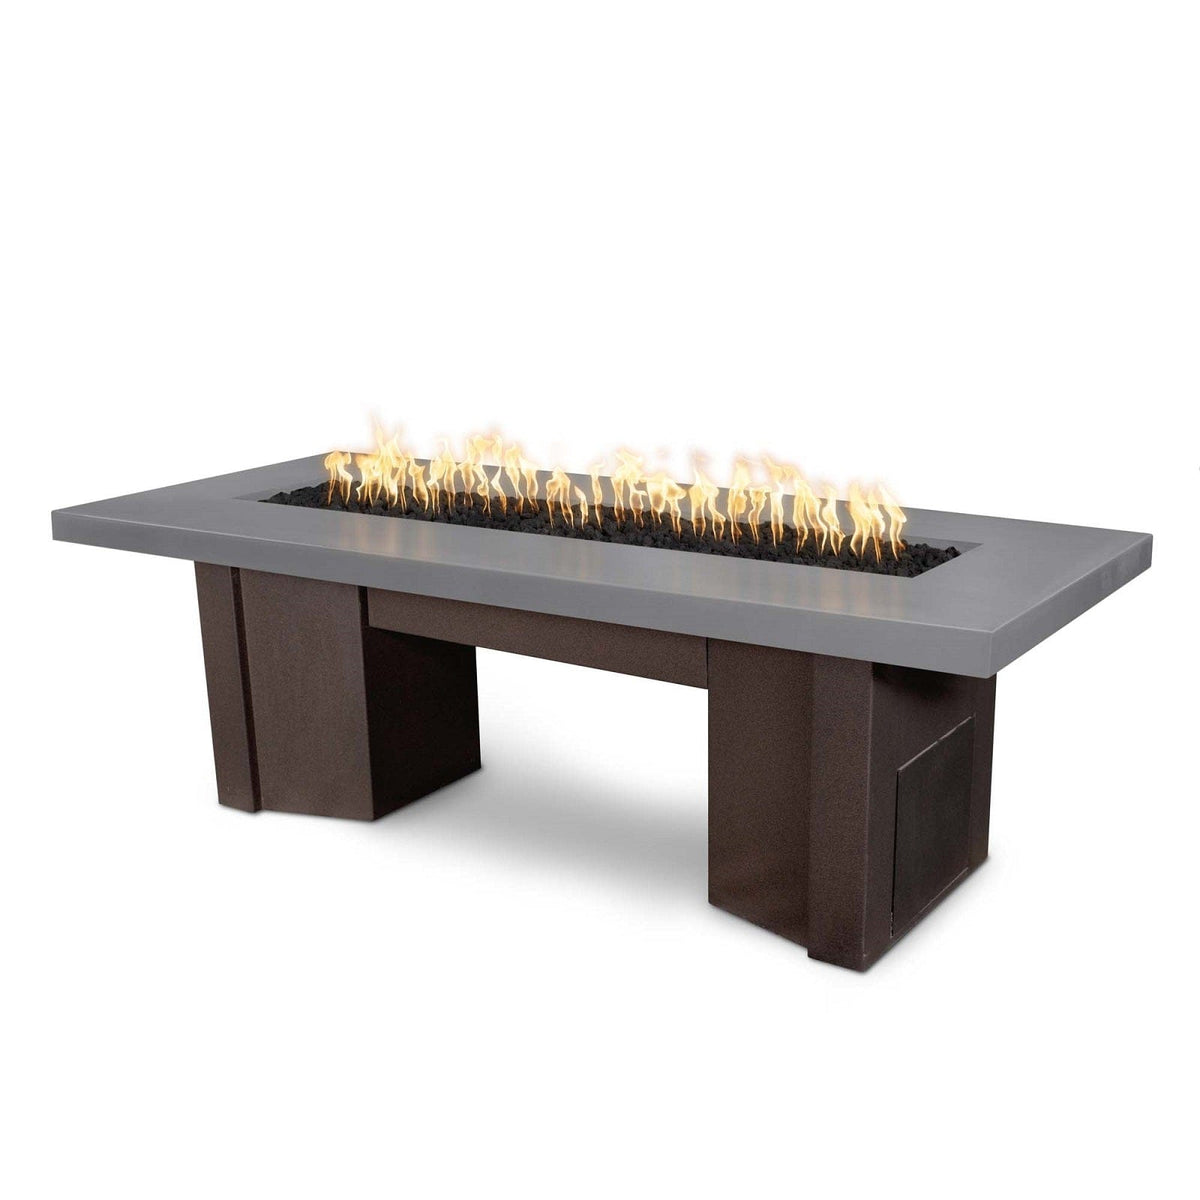 The Outdoor Plus Fire Features Natural Gray (-NGY) / Java Powder Coated Steel (-JAV) The Outdoor Plus 60&quot; Alameda Fire Table Smooth Concrete in Liquid Propane - Flame Sense System with Push Button Spark Igniter / OPT-ALMGFRC60FSEN-LP